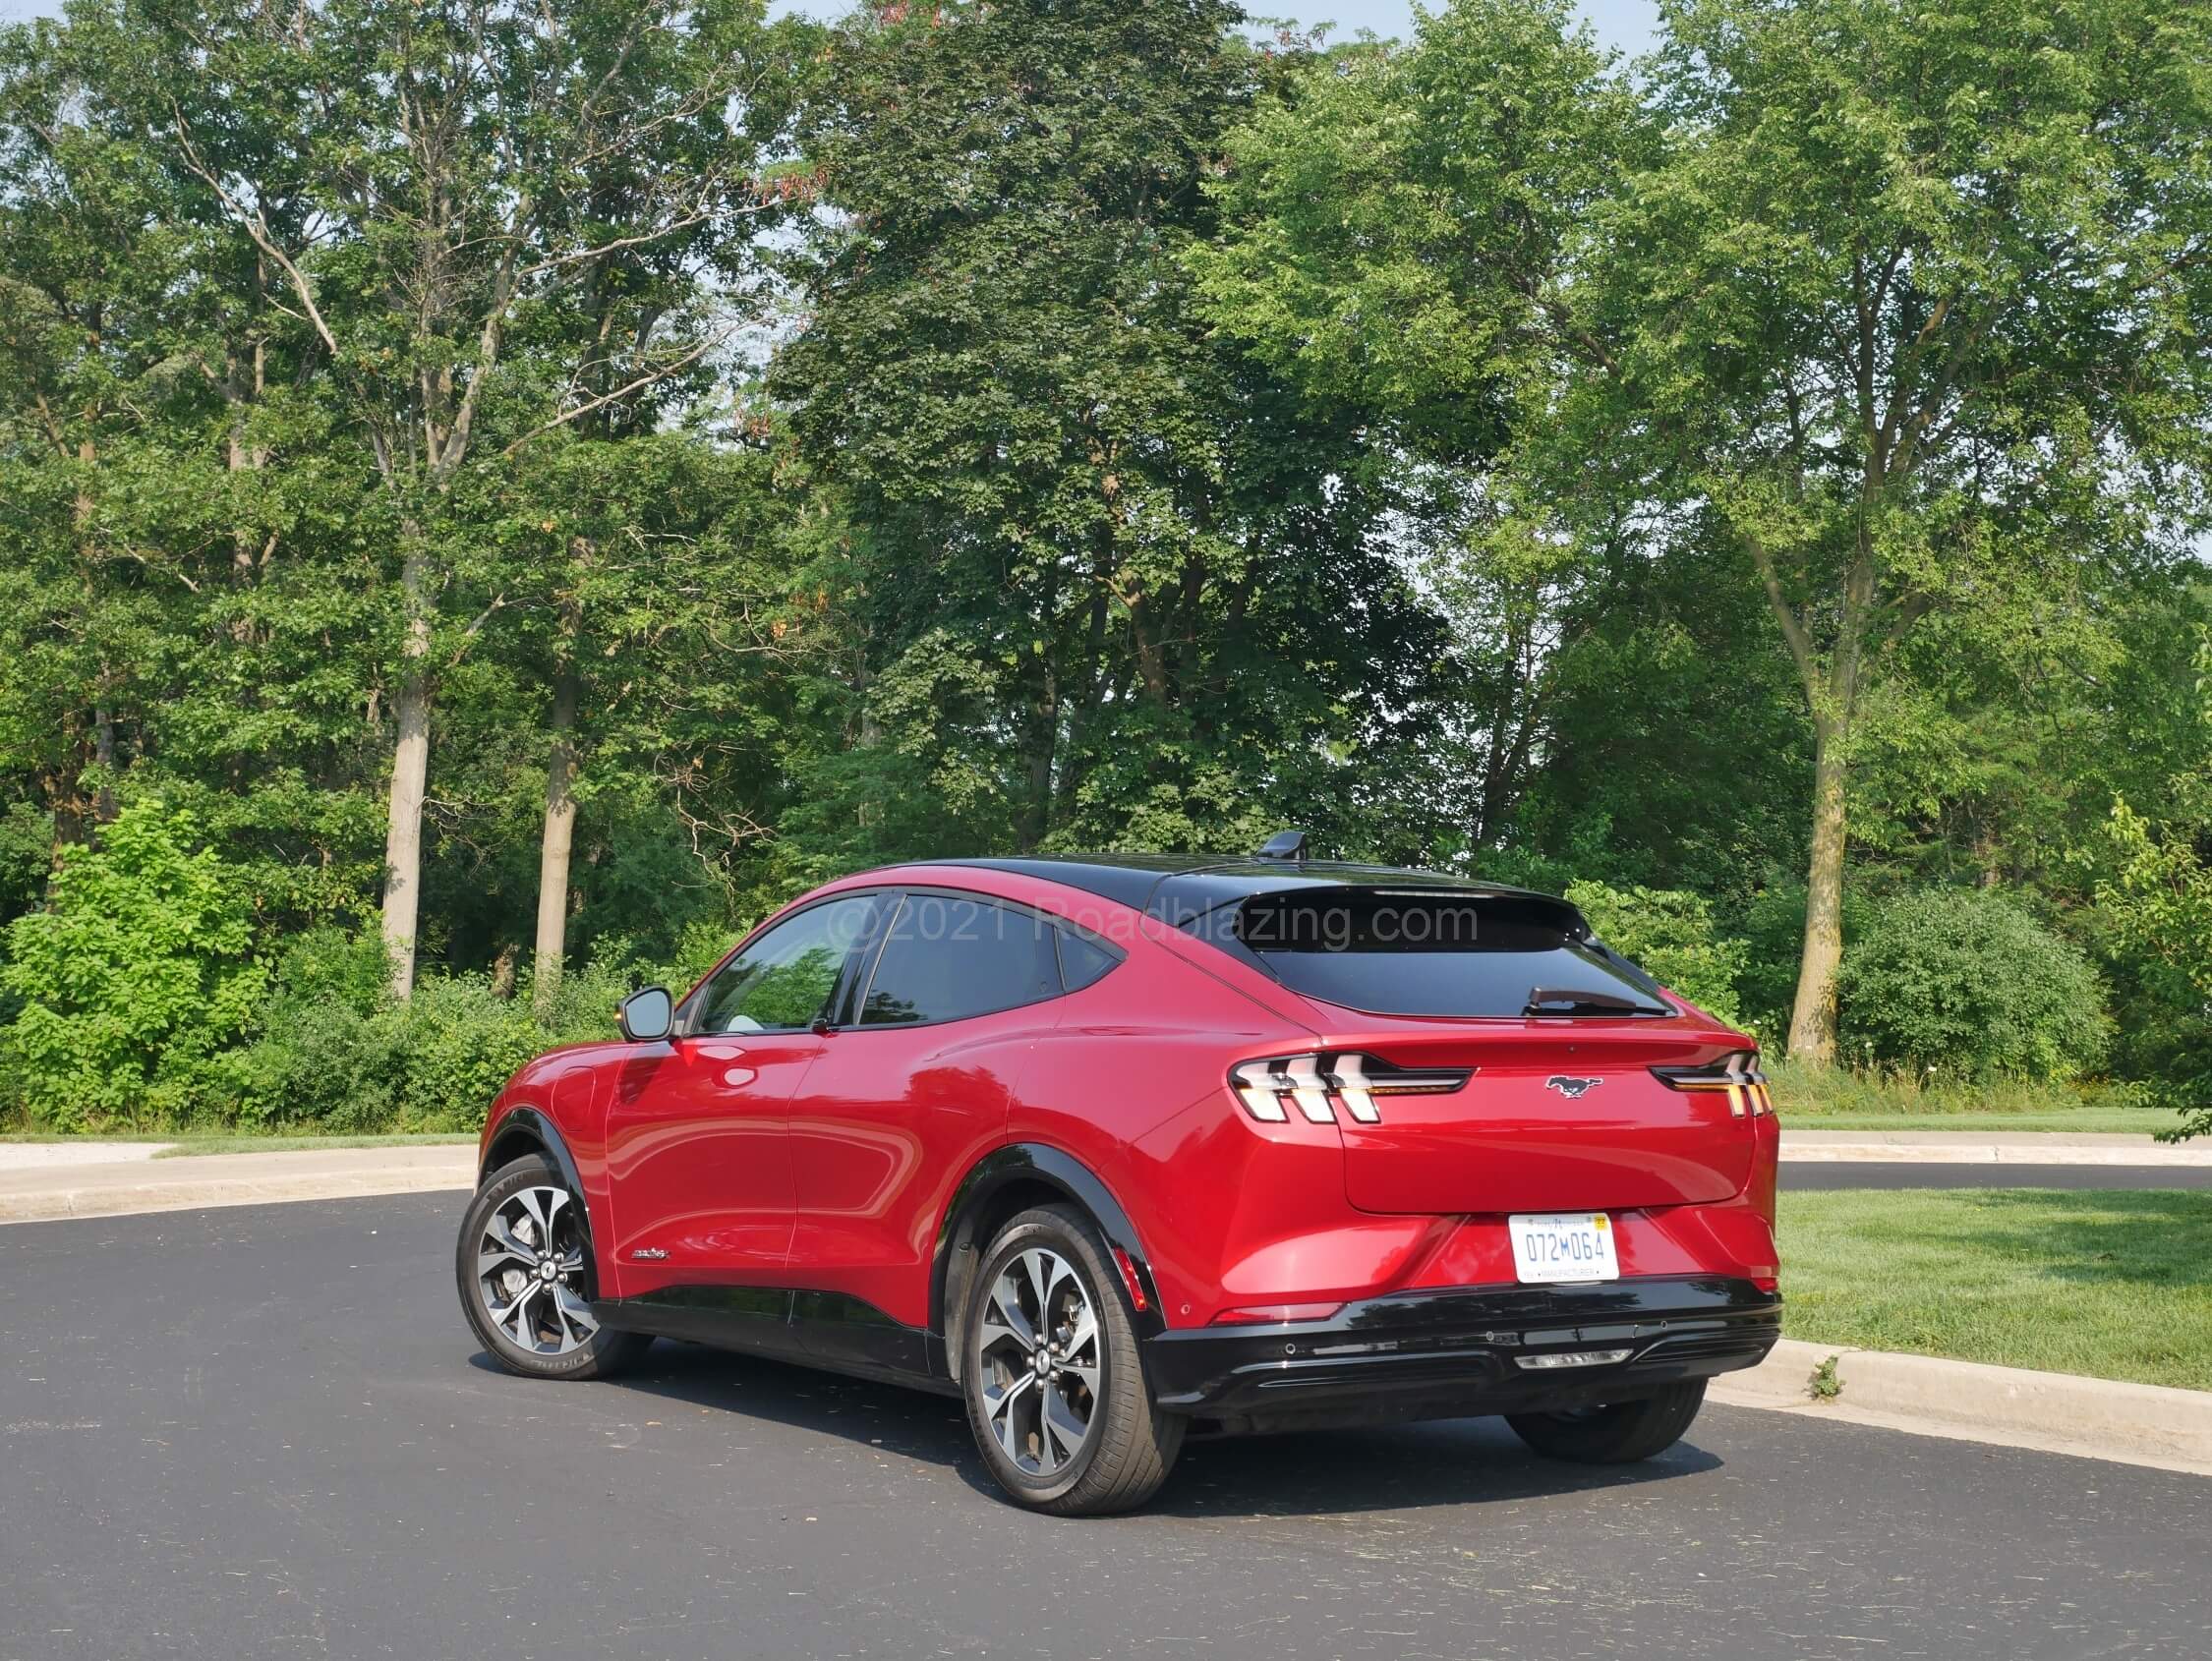 2021 Ford Mustang Mach-E Premium AWD: a lifted stance and long slope Kammback rear liftgate makes = crossover sport activity vehicle